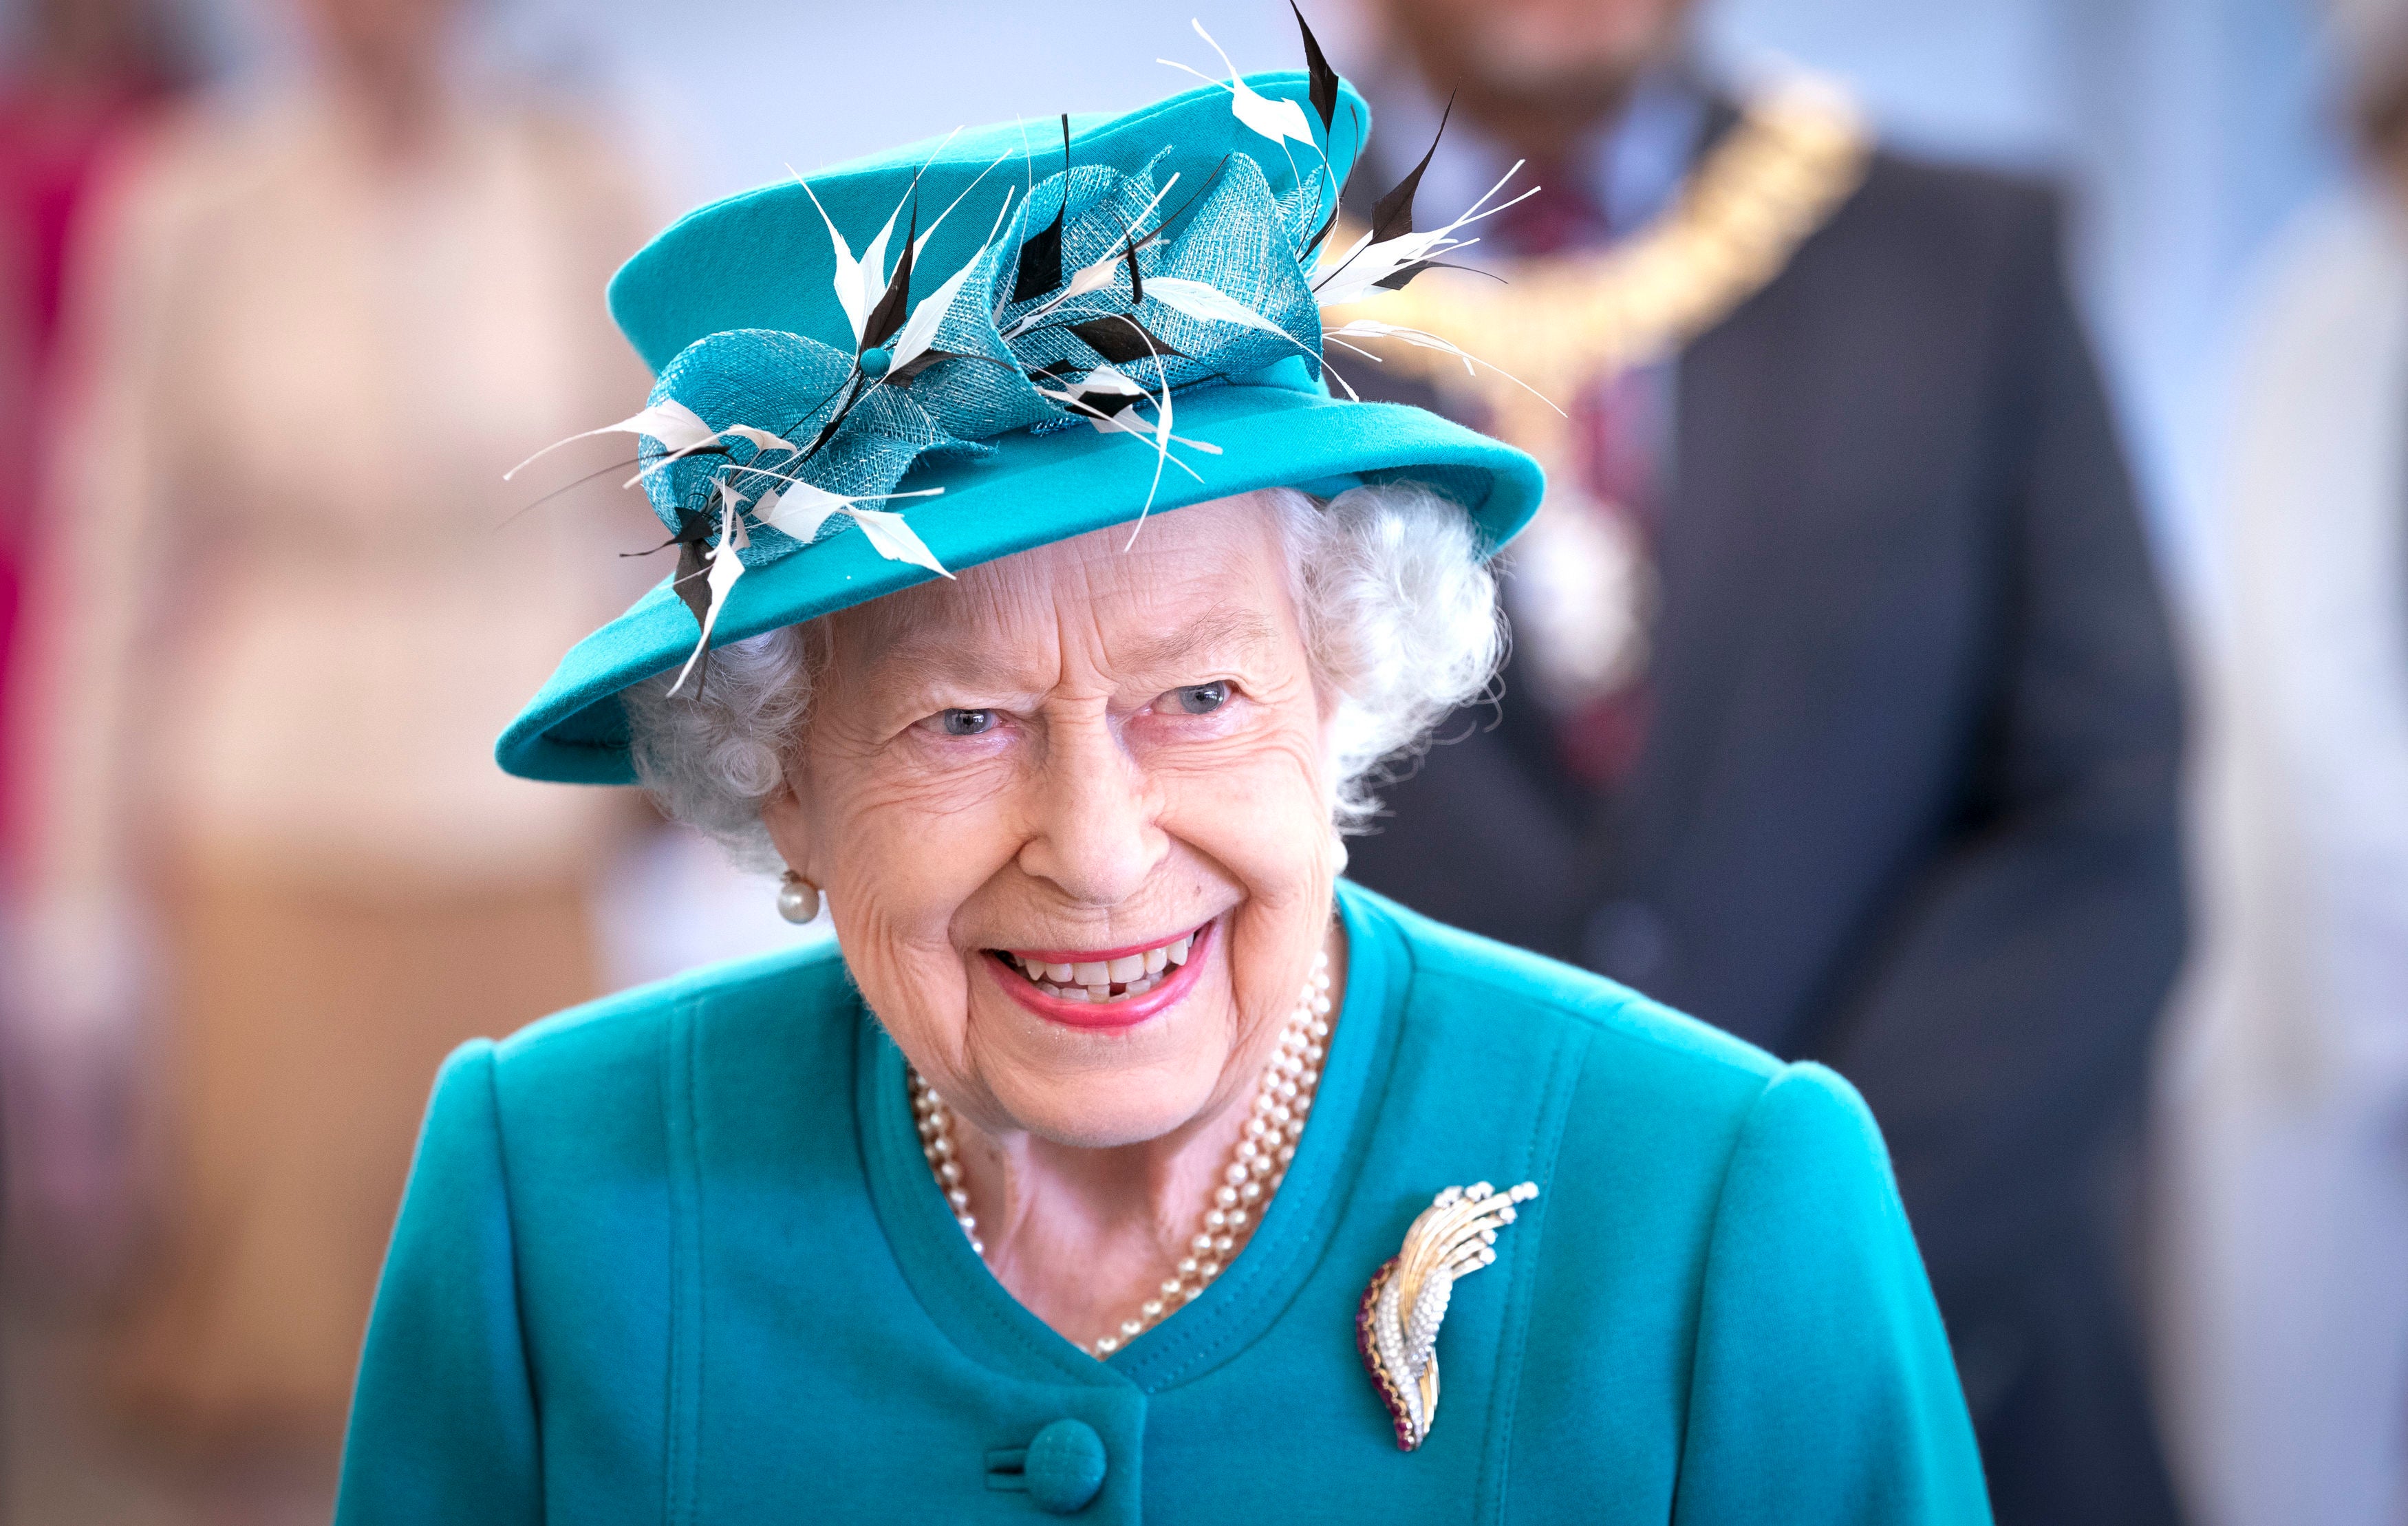 The Queen visited the Edinburgh Climate Change Institute as part of a visit to Scotland